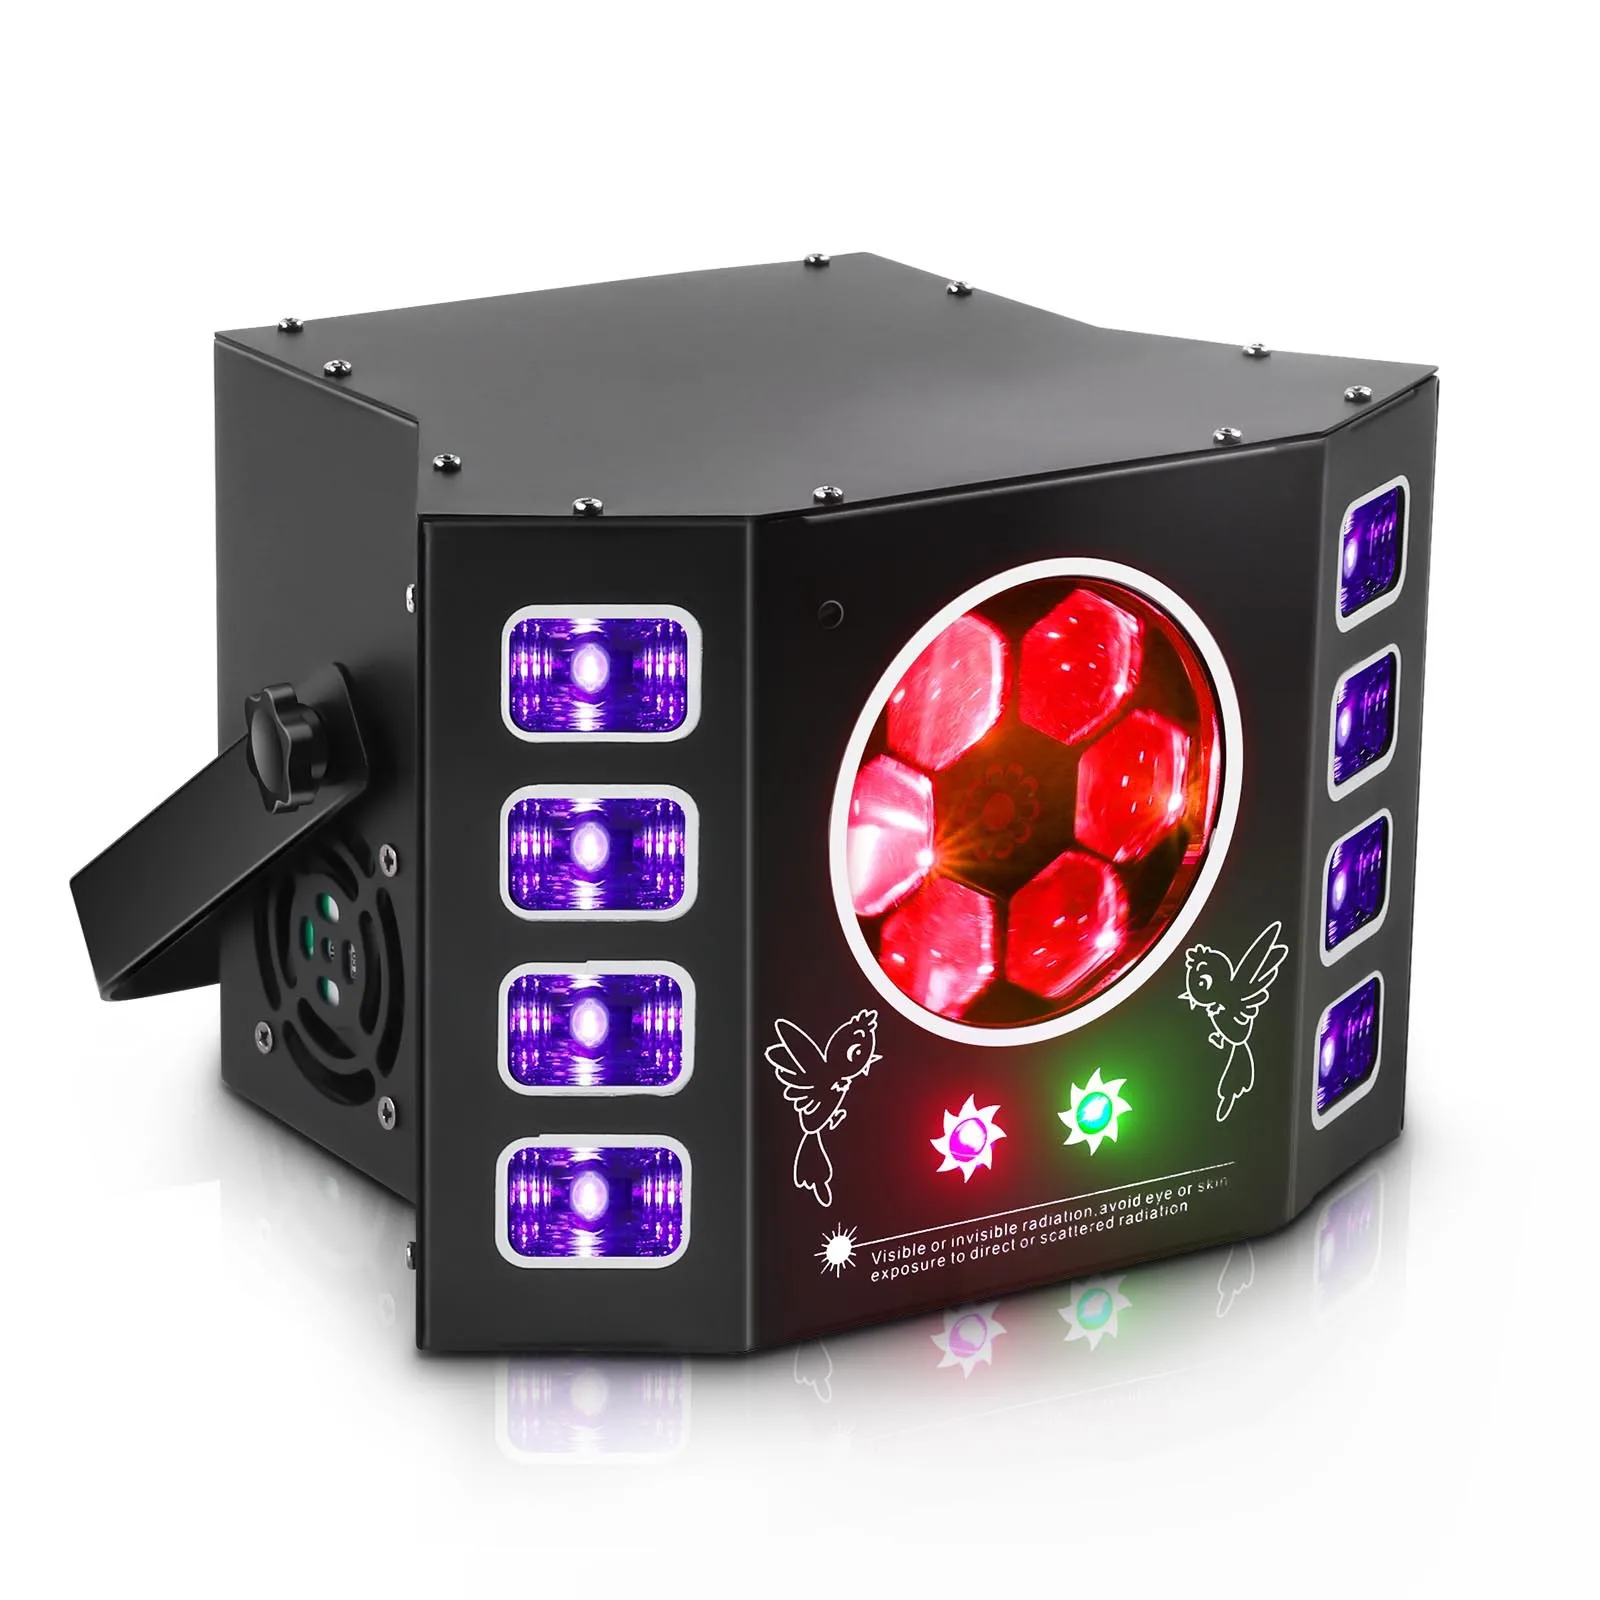 UV Dj 100W Bee Eye Strobe Stage Light Sound Activated Multiple Pattern DMX512 Control Holiday Event Live Show